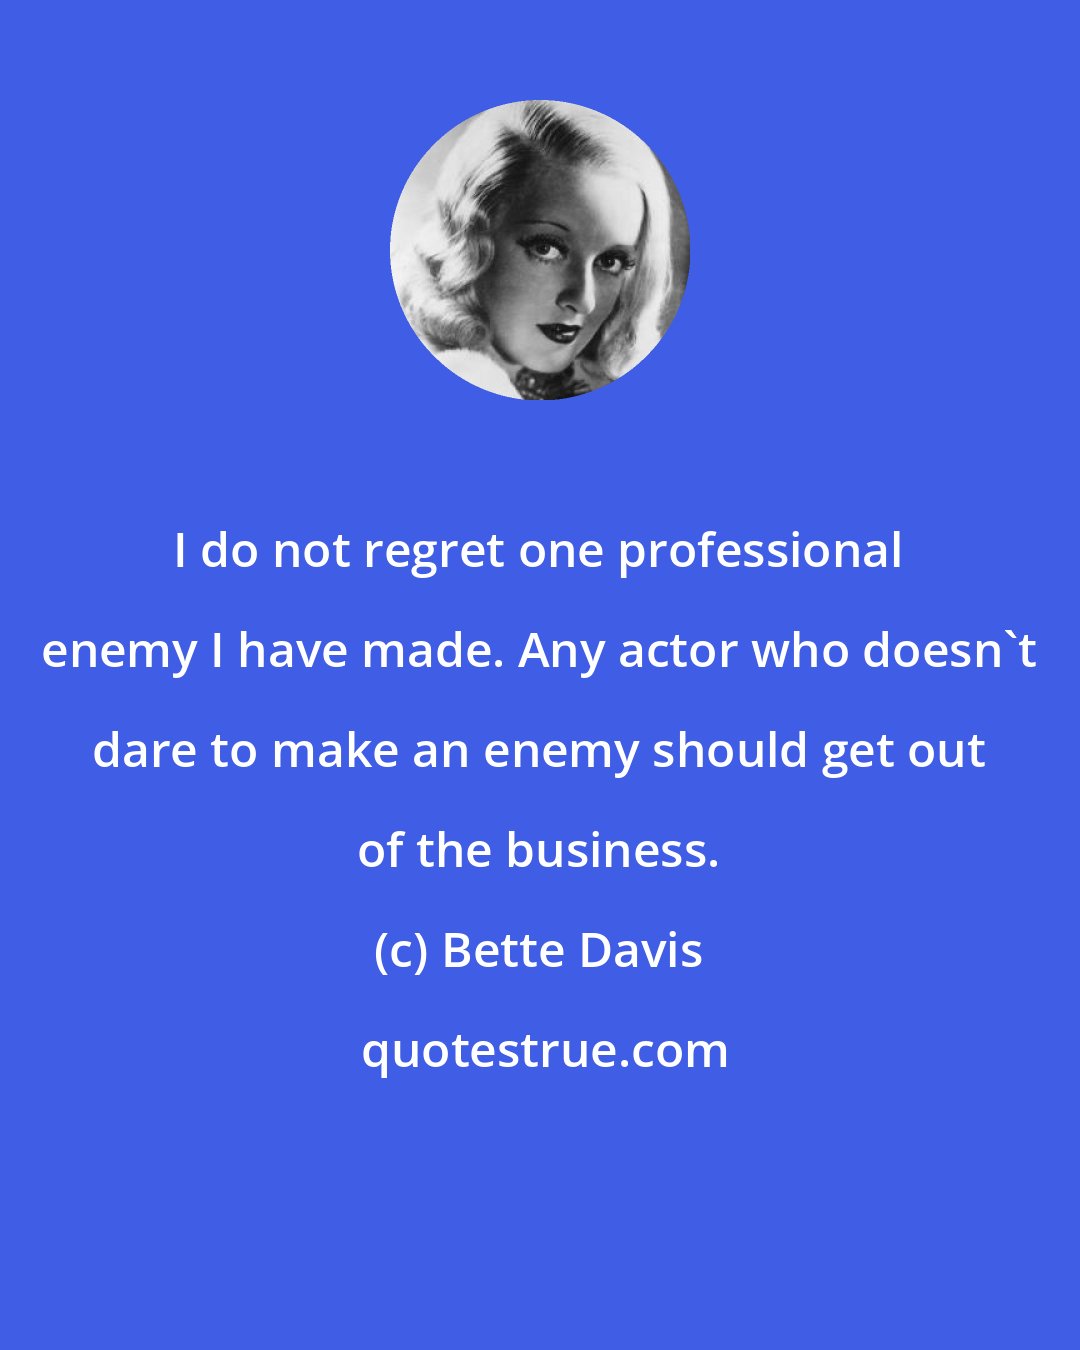 Bette Davis: I do not regret one professional enemy I have made. Any actor who doesn't dare to make an enemy should get out of the business.